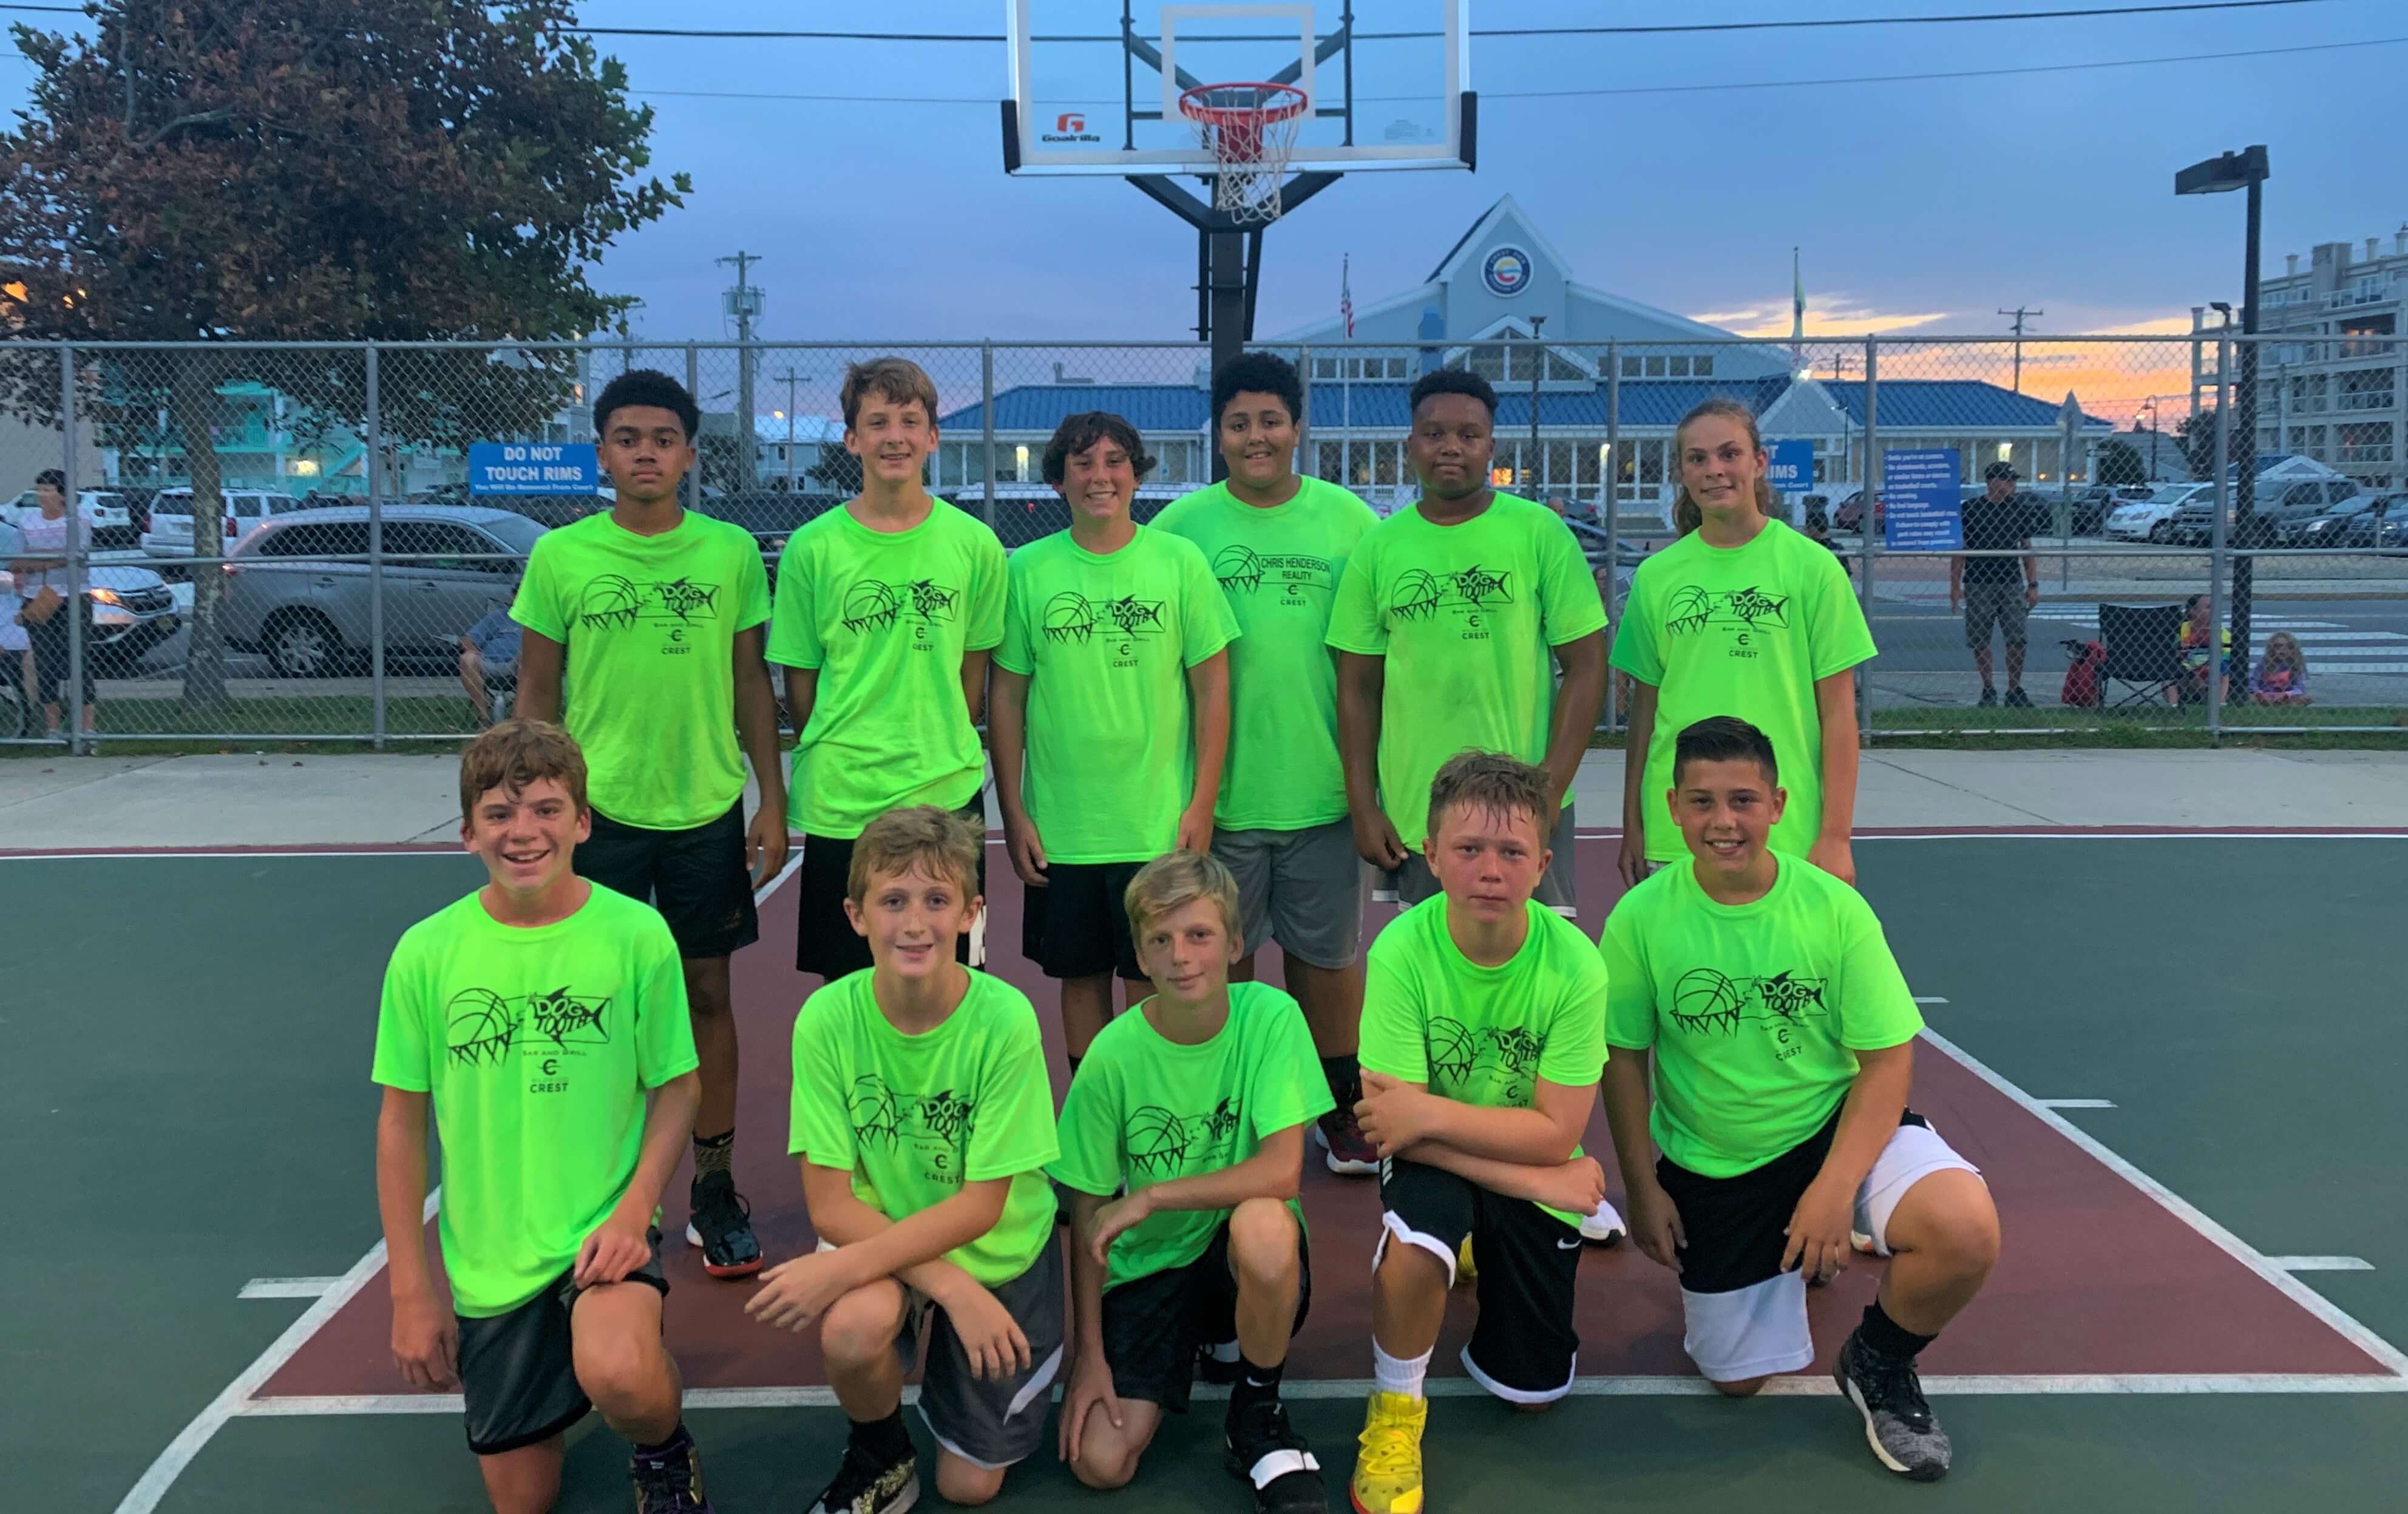 The Dogtooth Bar & Grill team won the grades 6-8 division championship in the Wildwood Crest Recreation summer basketball league. Pictured are (from left): front row – Burke Fitzsimons